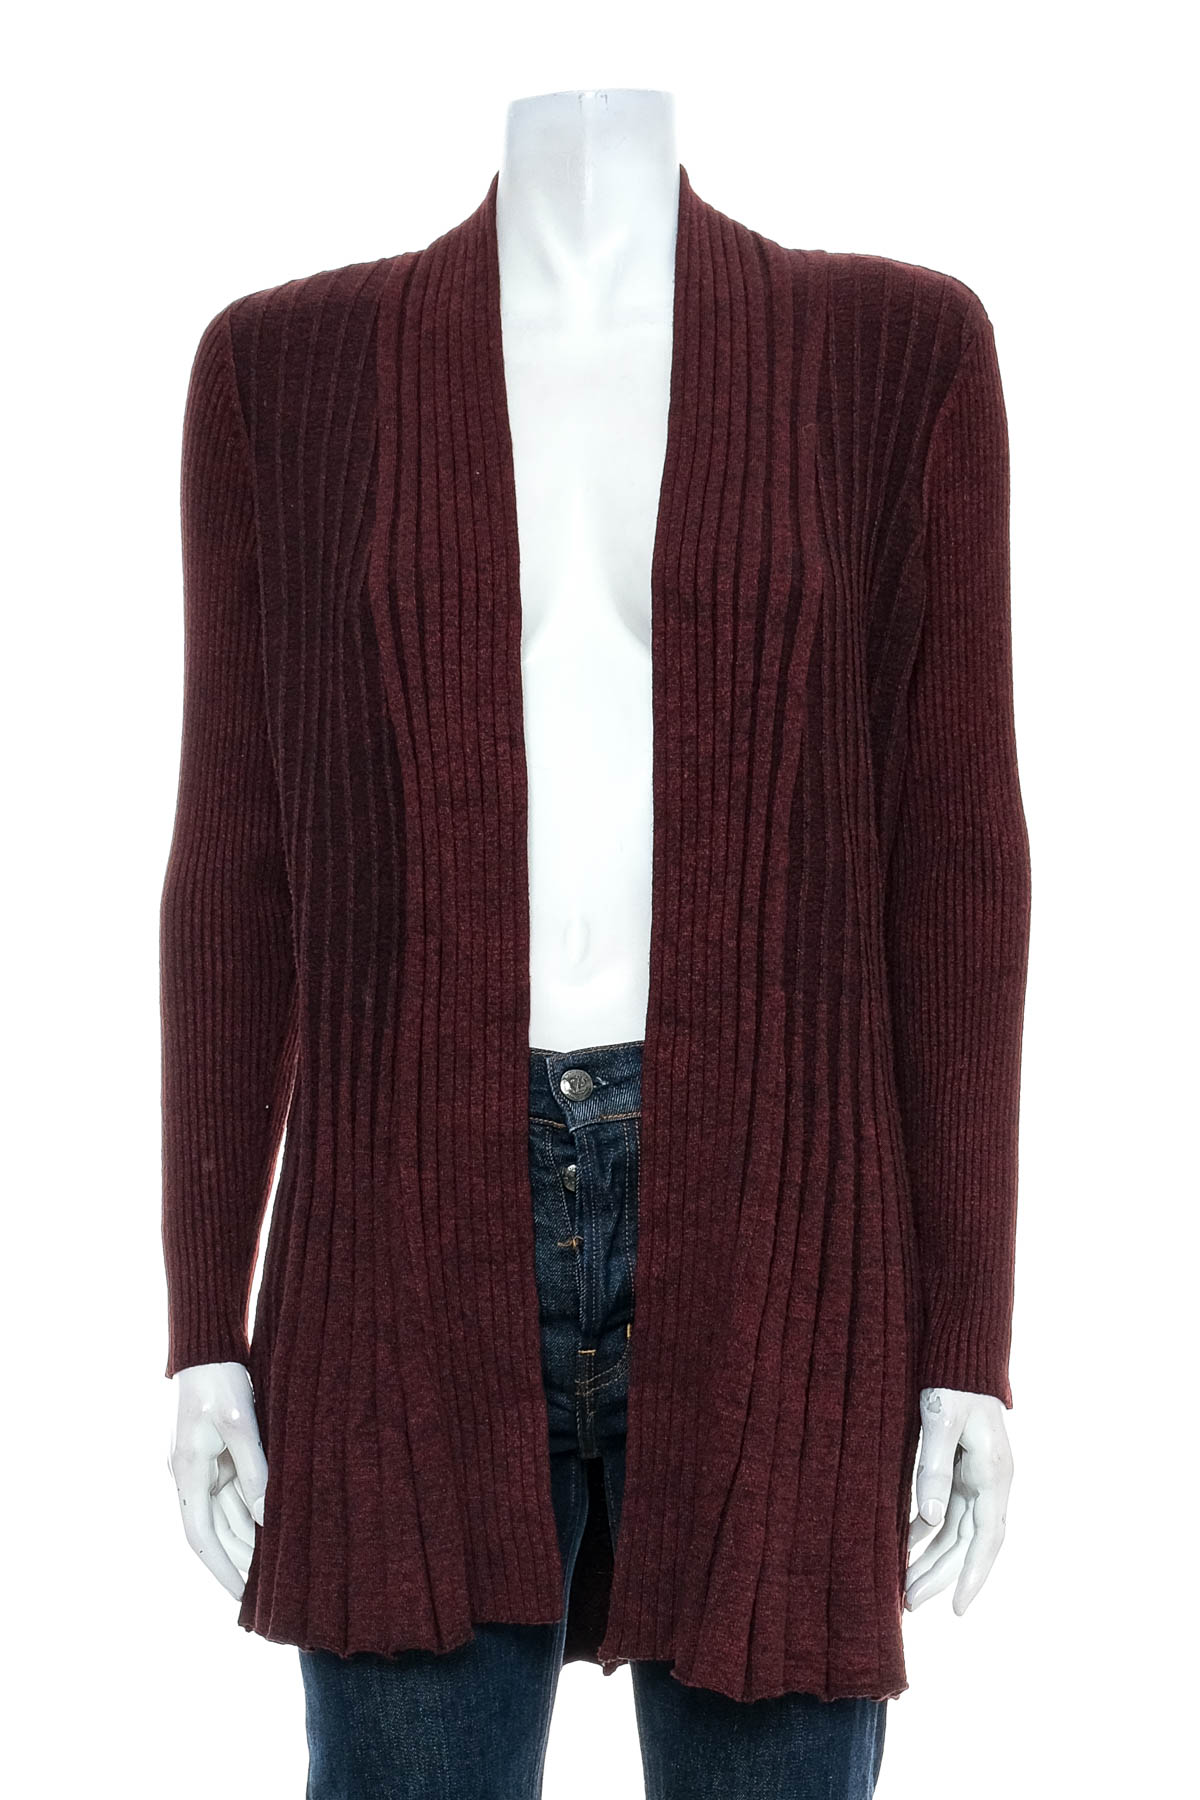 Women's cardigan - NY Collection - 0